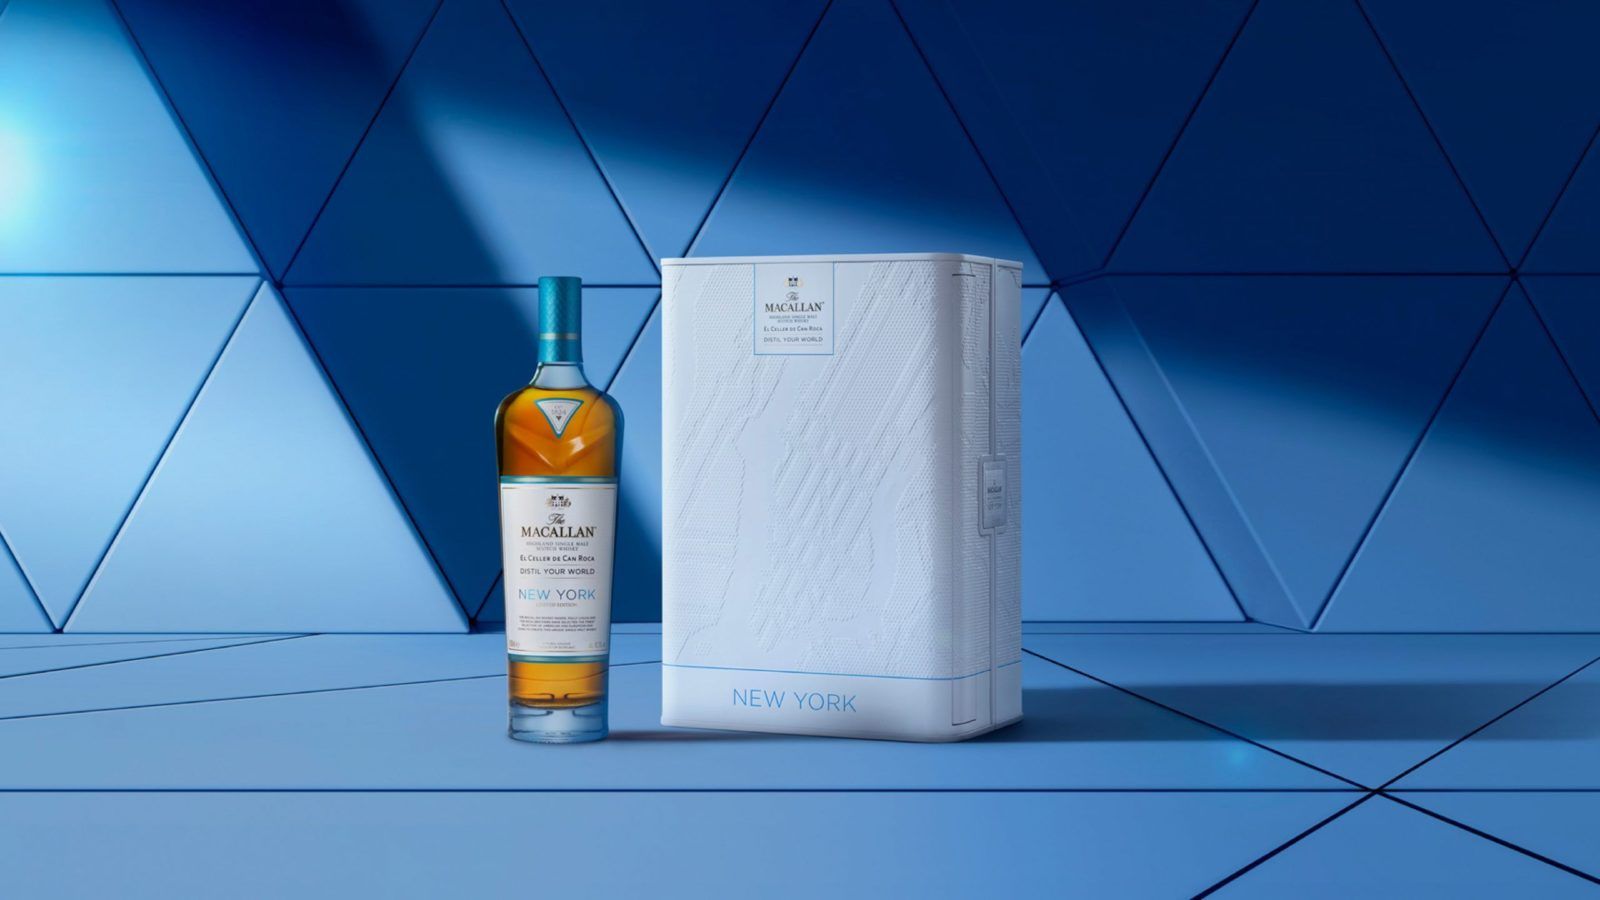 The Macallan teams up with Roca brothers for a New York-inspired limited edition single malt whisky